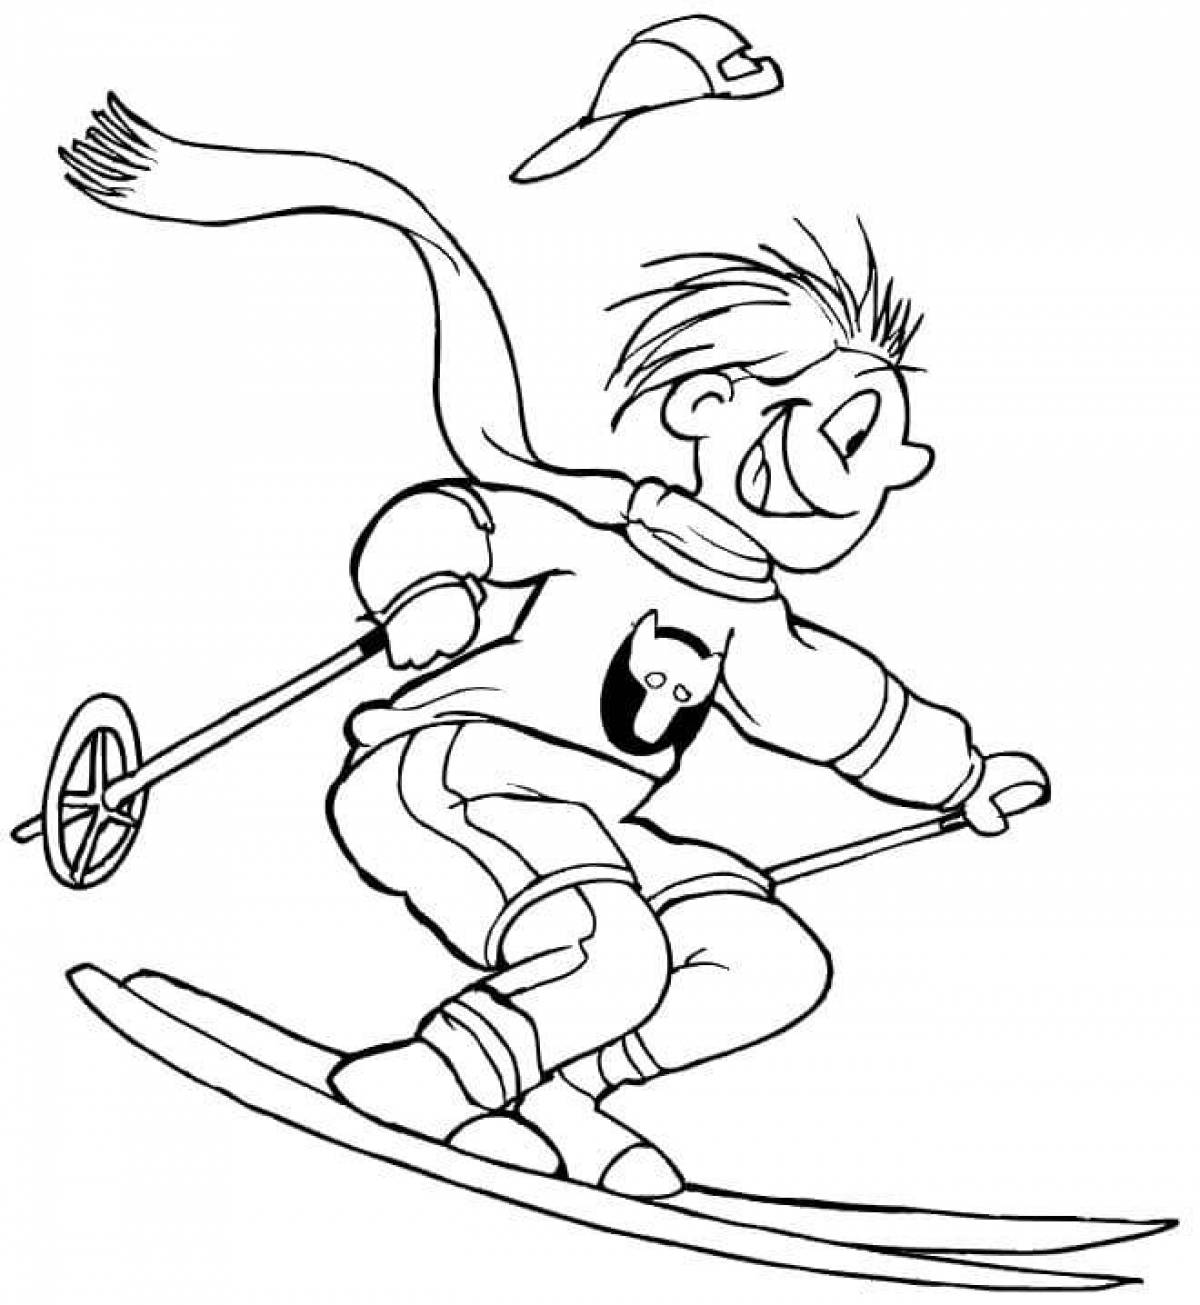 Glorious winter sports coloring page for 5-6 year olds